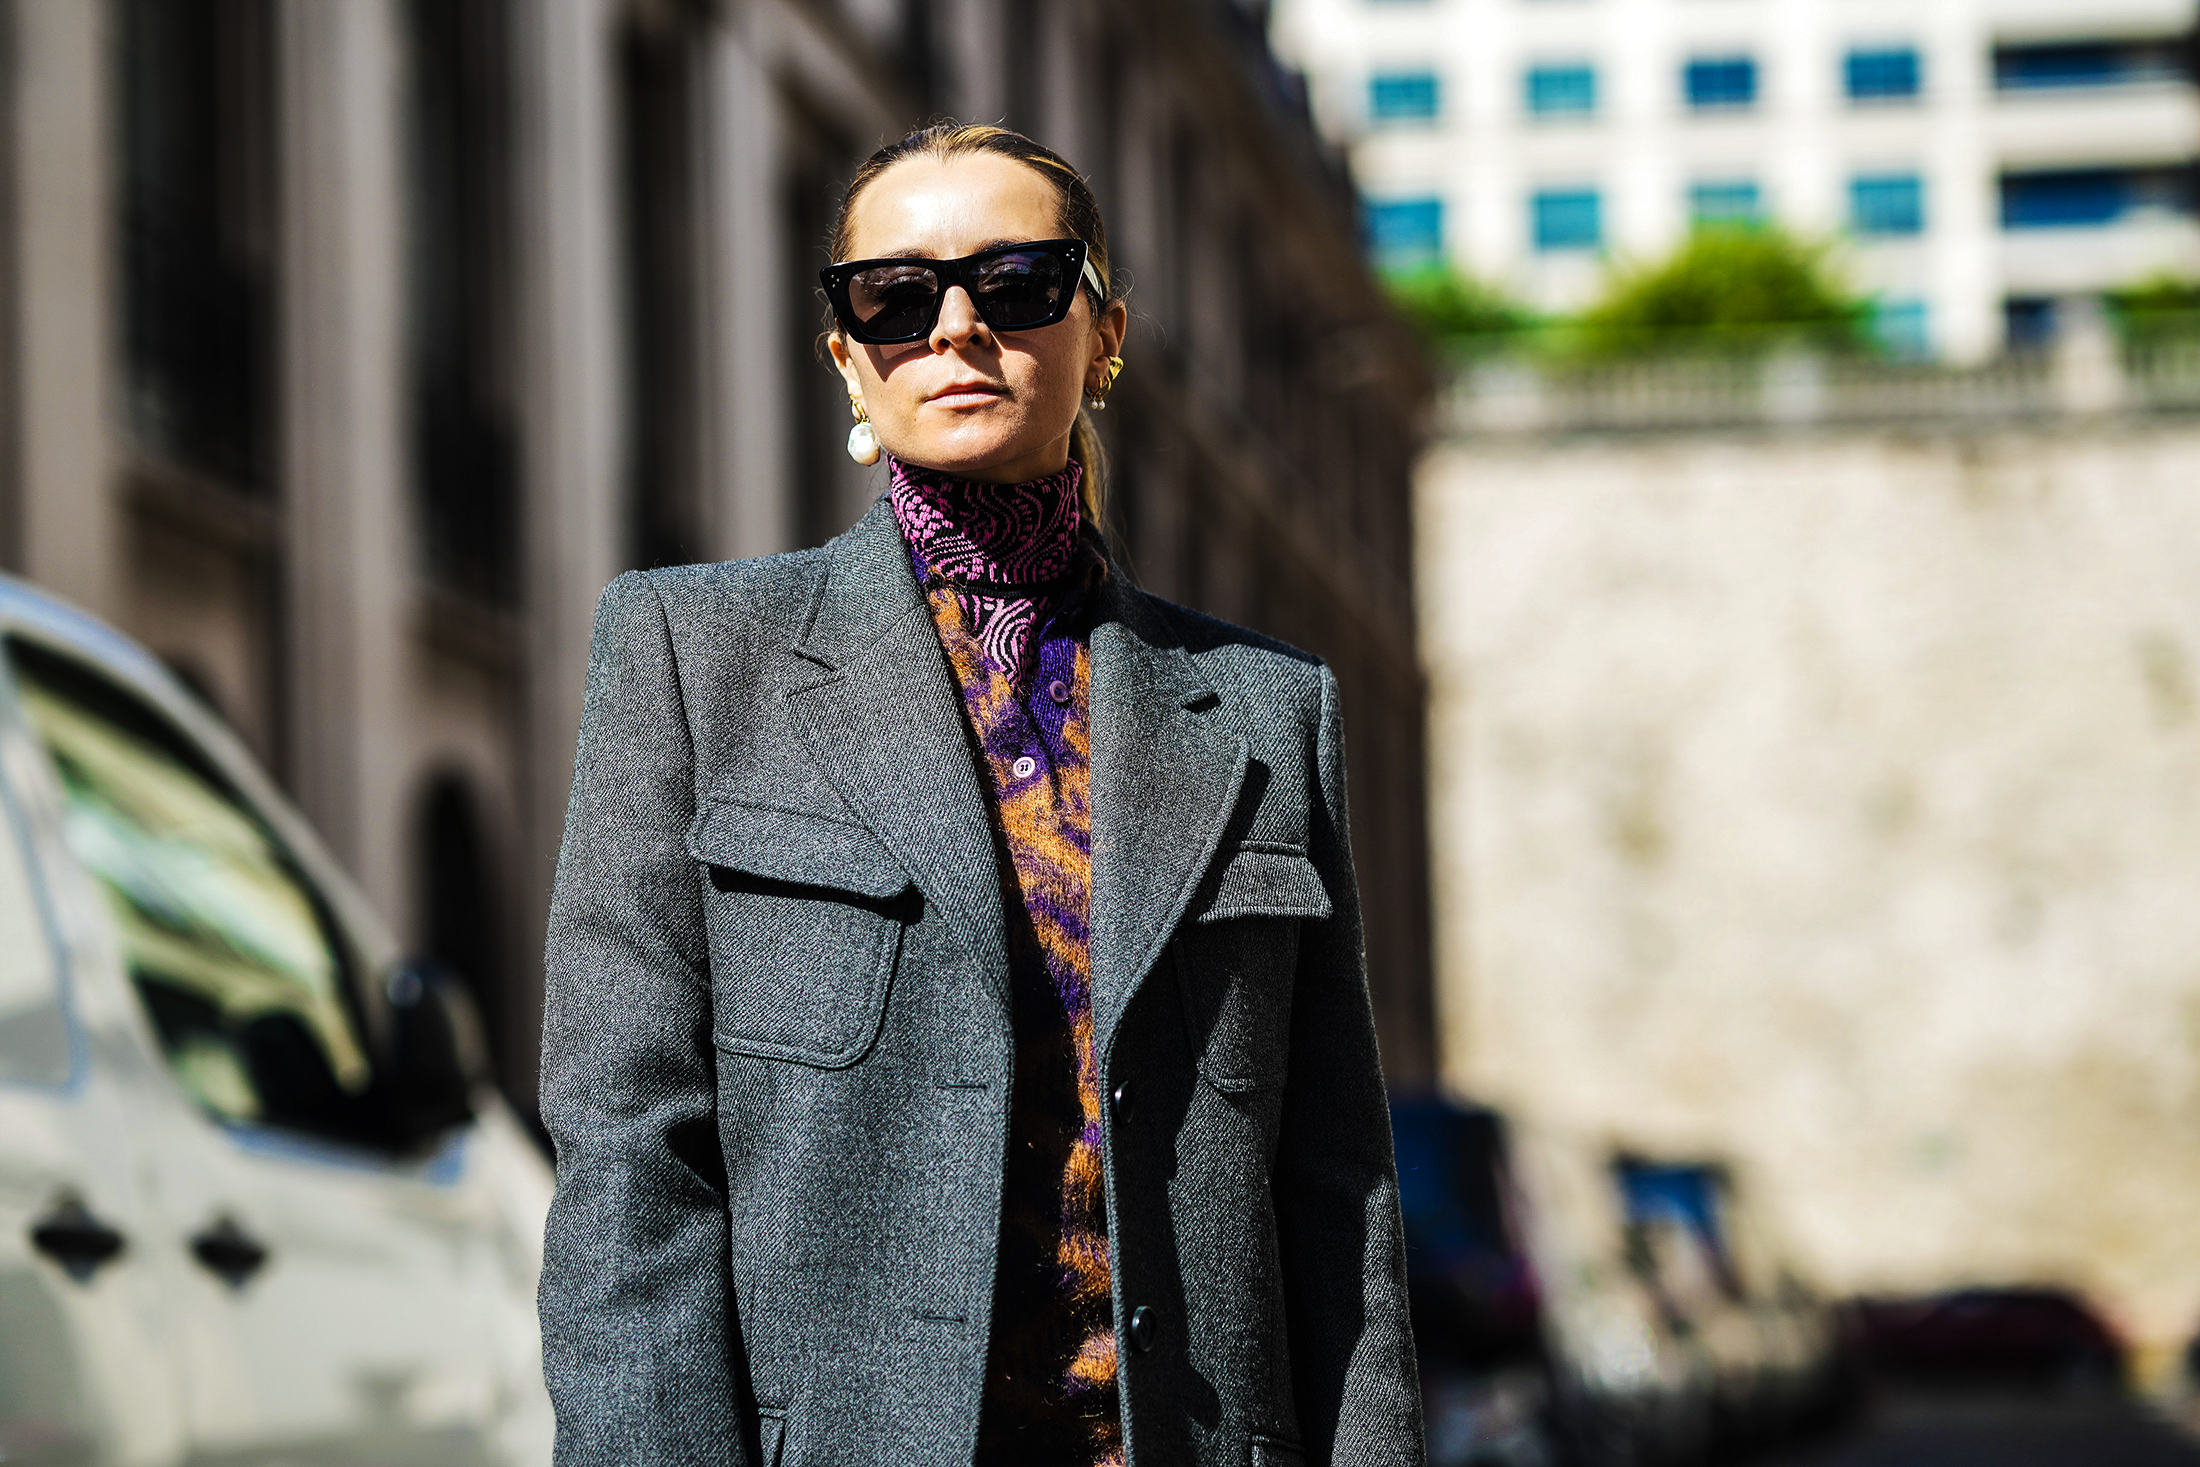 The Latest Street Style Moments: What Everyone Is Wearing in Milan Right  Now•Fall Fashion Trends 